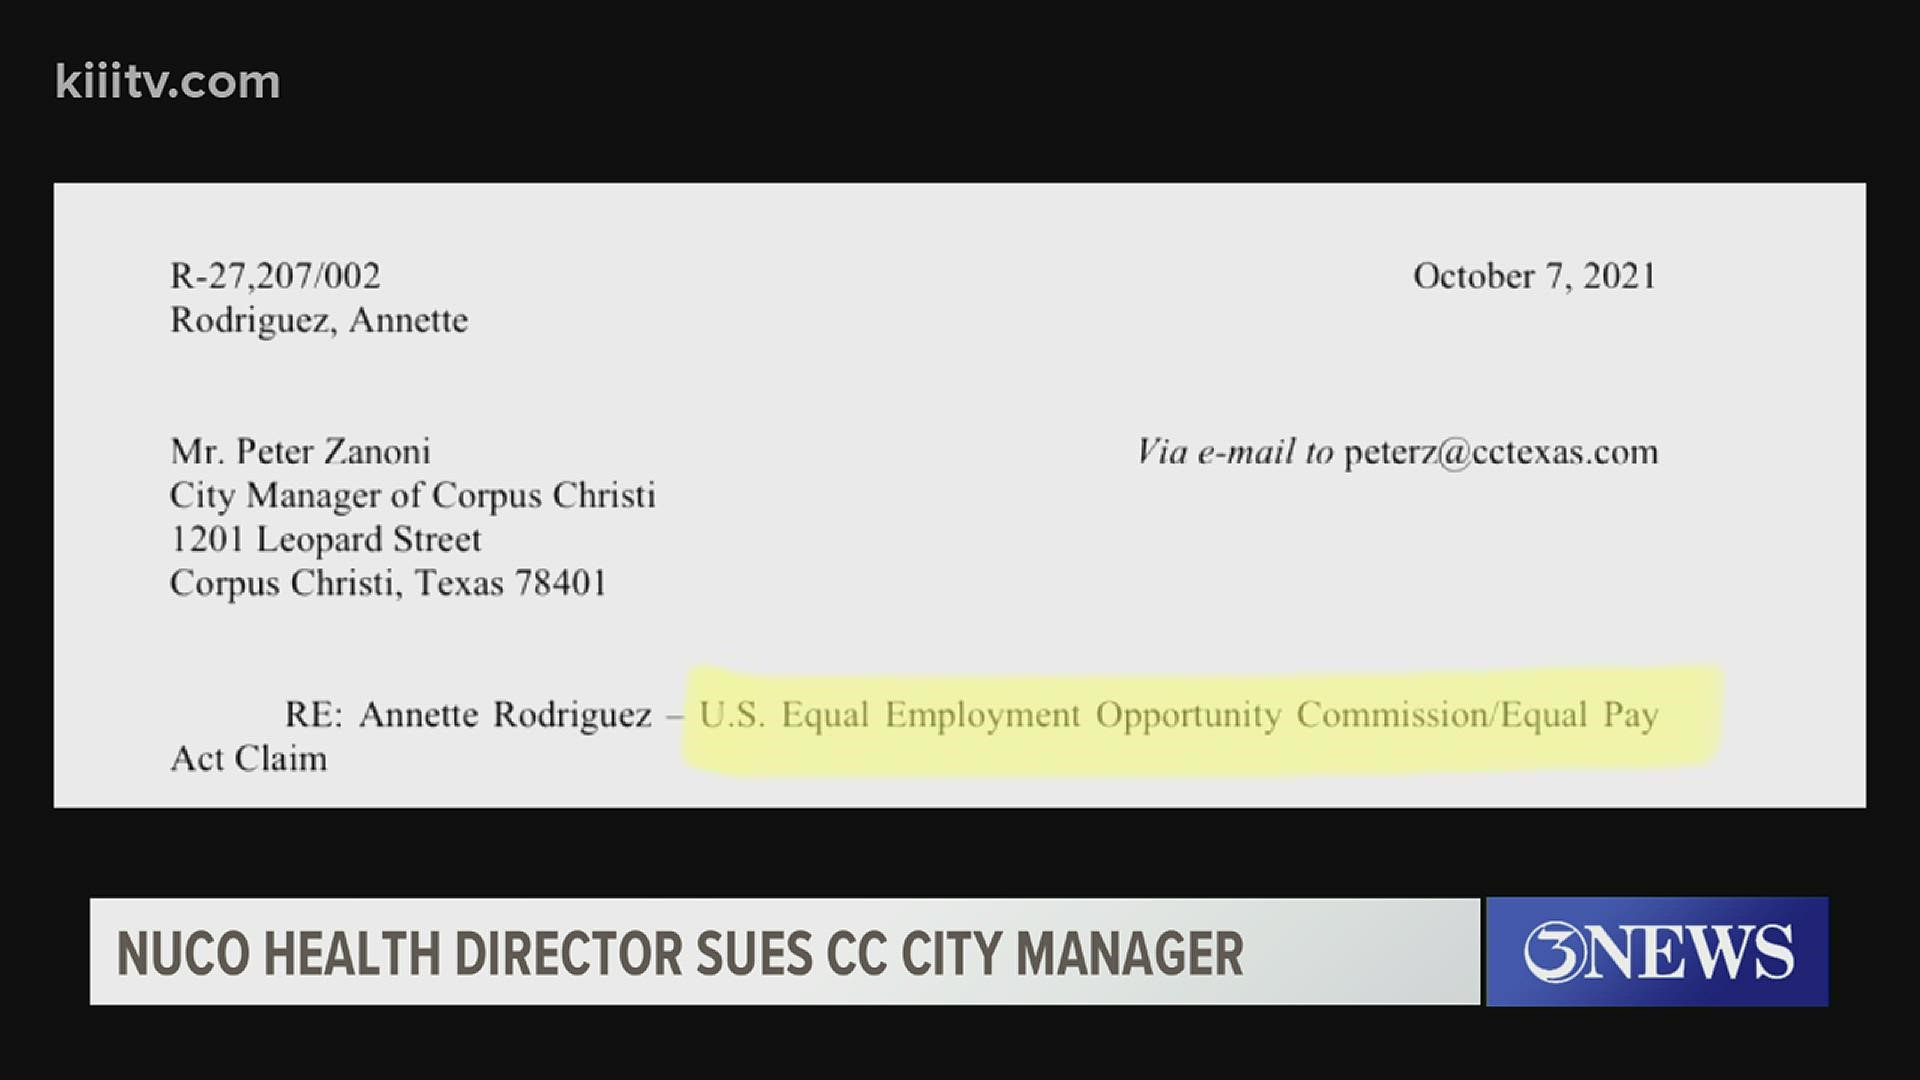 In a letter to City Manager Peter Zanoni, attorneys for Health Director Annette Rodriguez said that Rodriguez "experienced discrimination based on her sex."